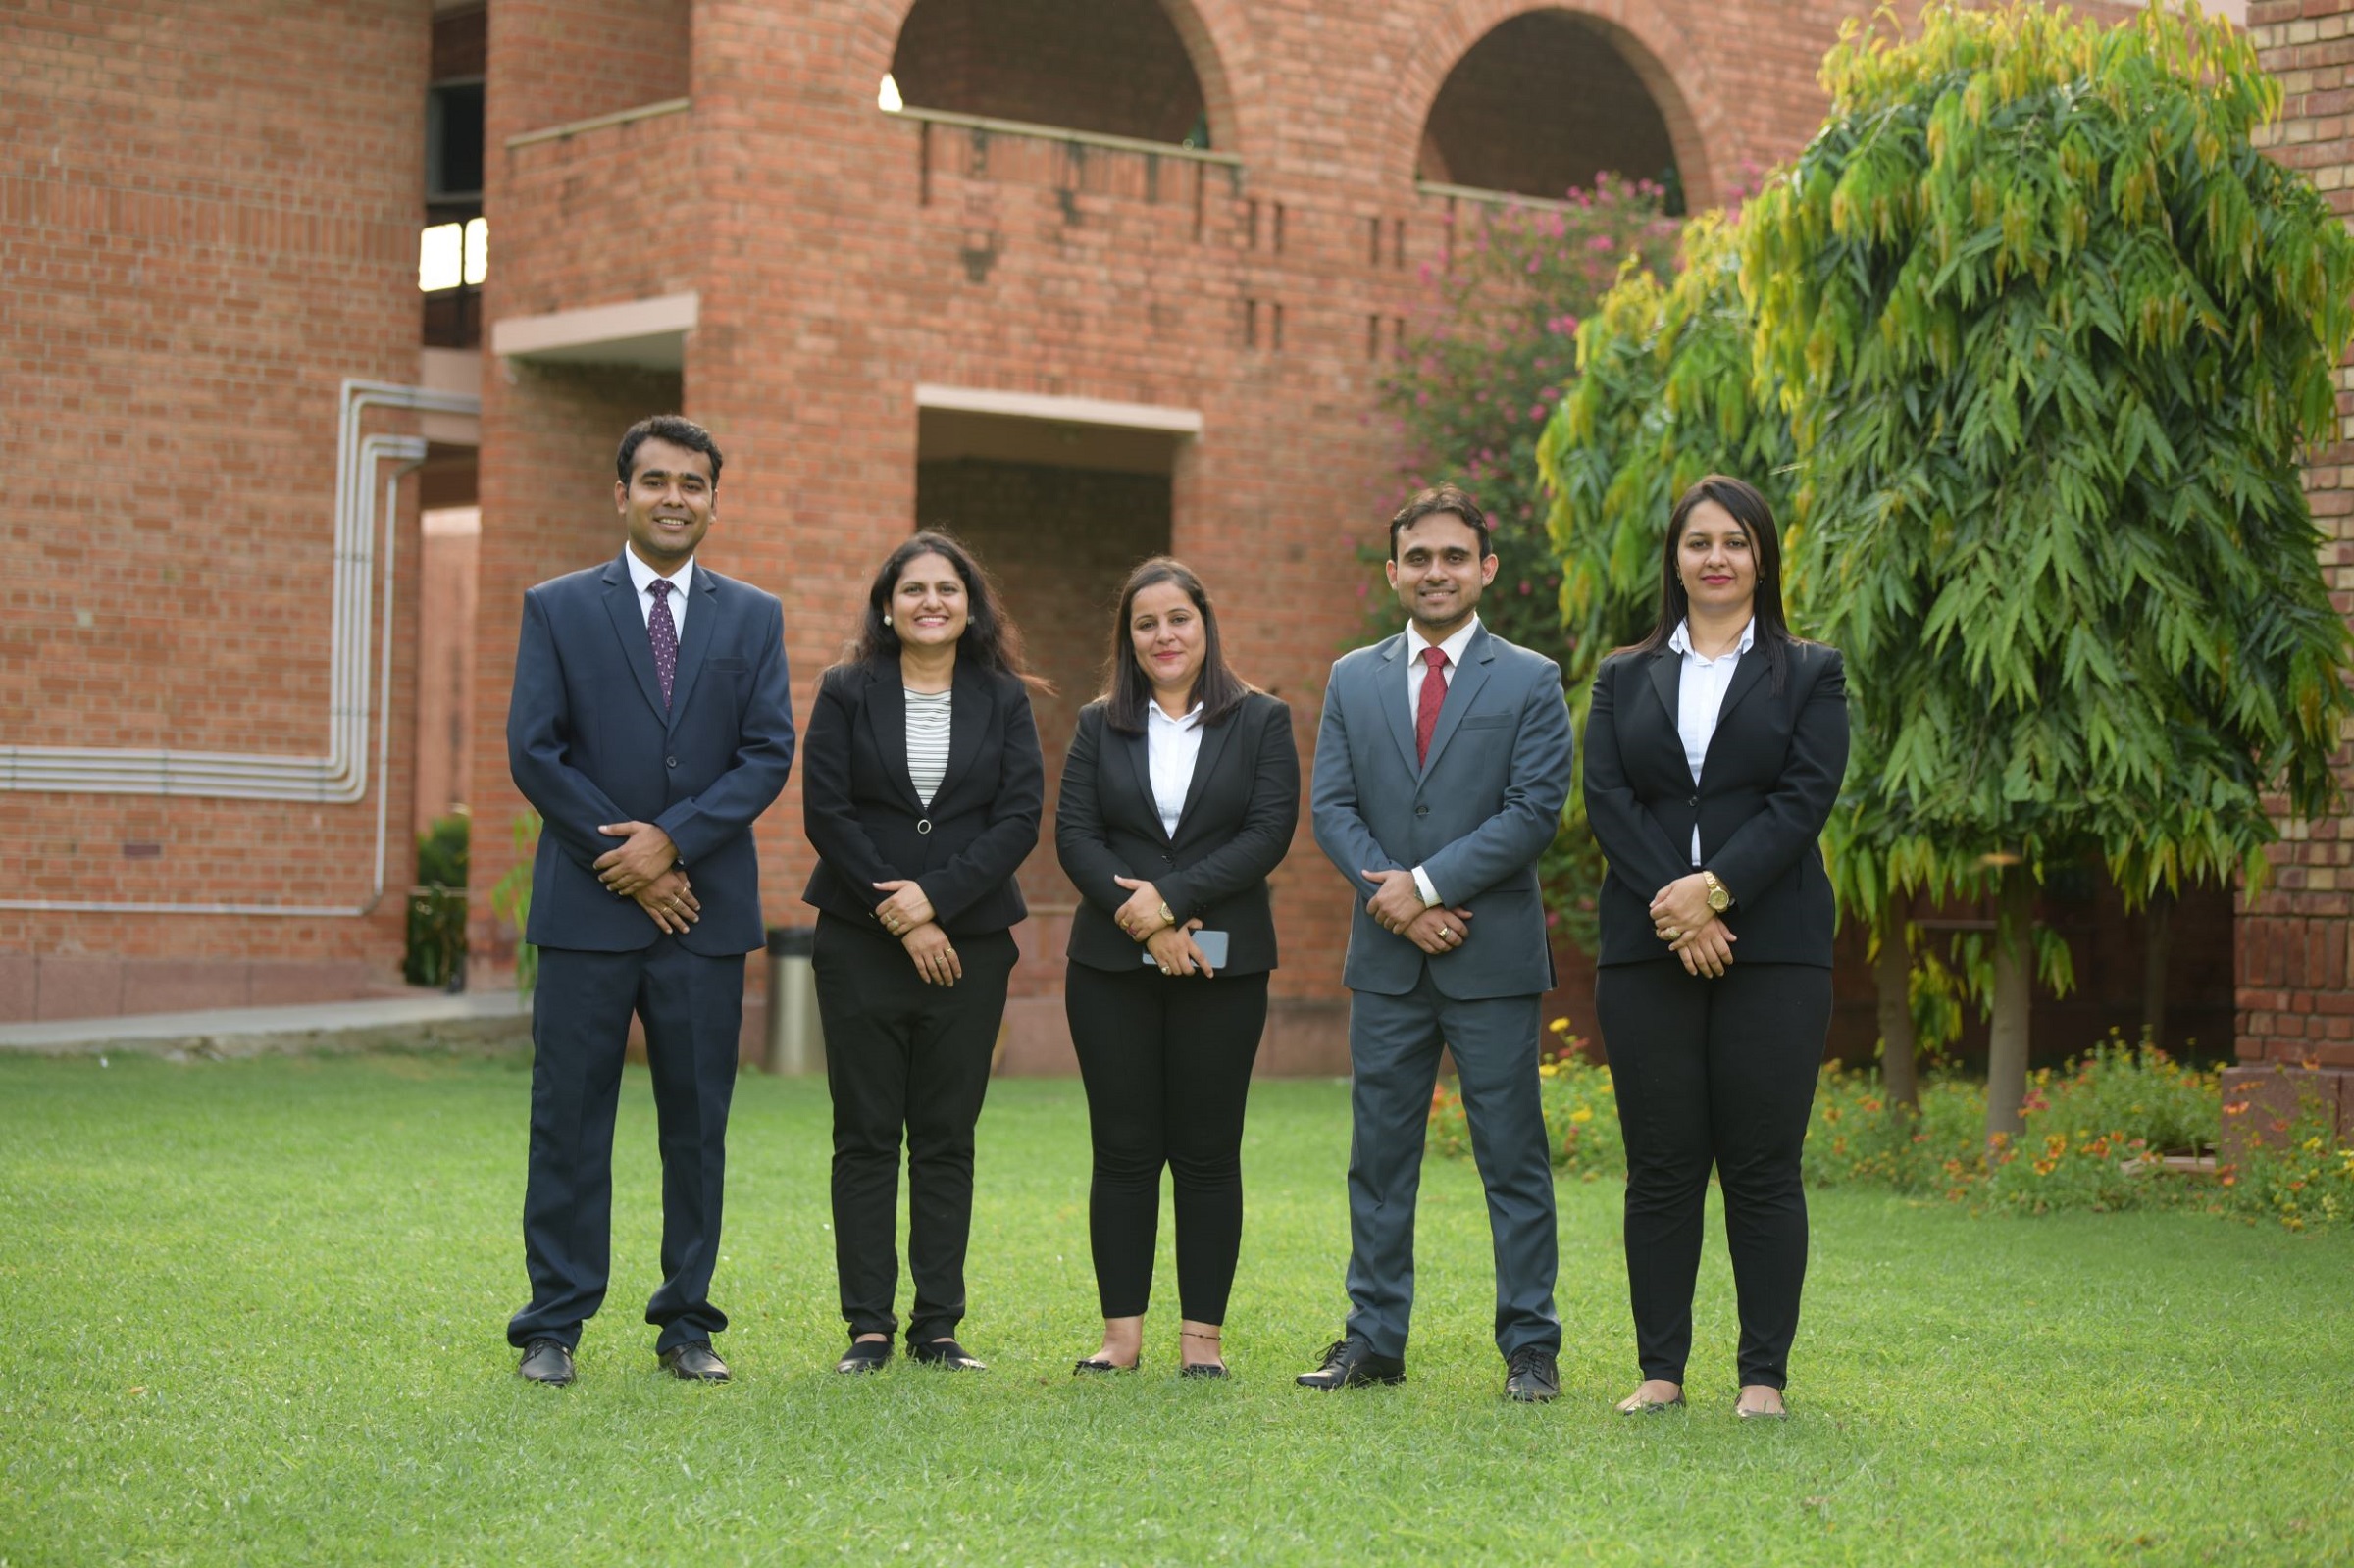 NMP Class of 2018 at MDI Gurgaon has 32% participants from IT/ITES